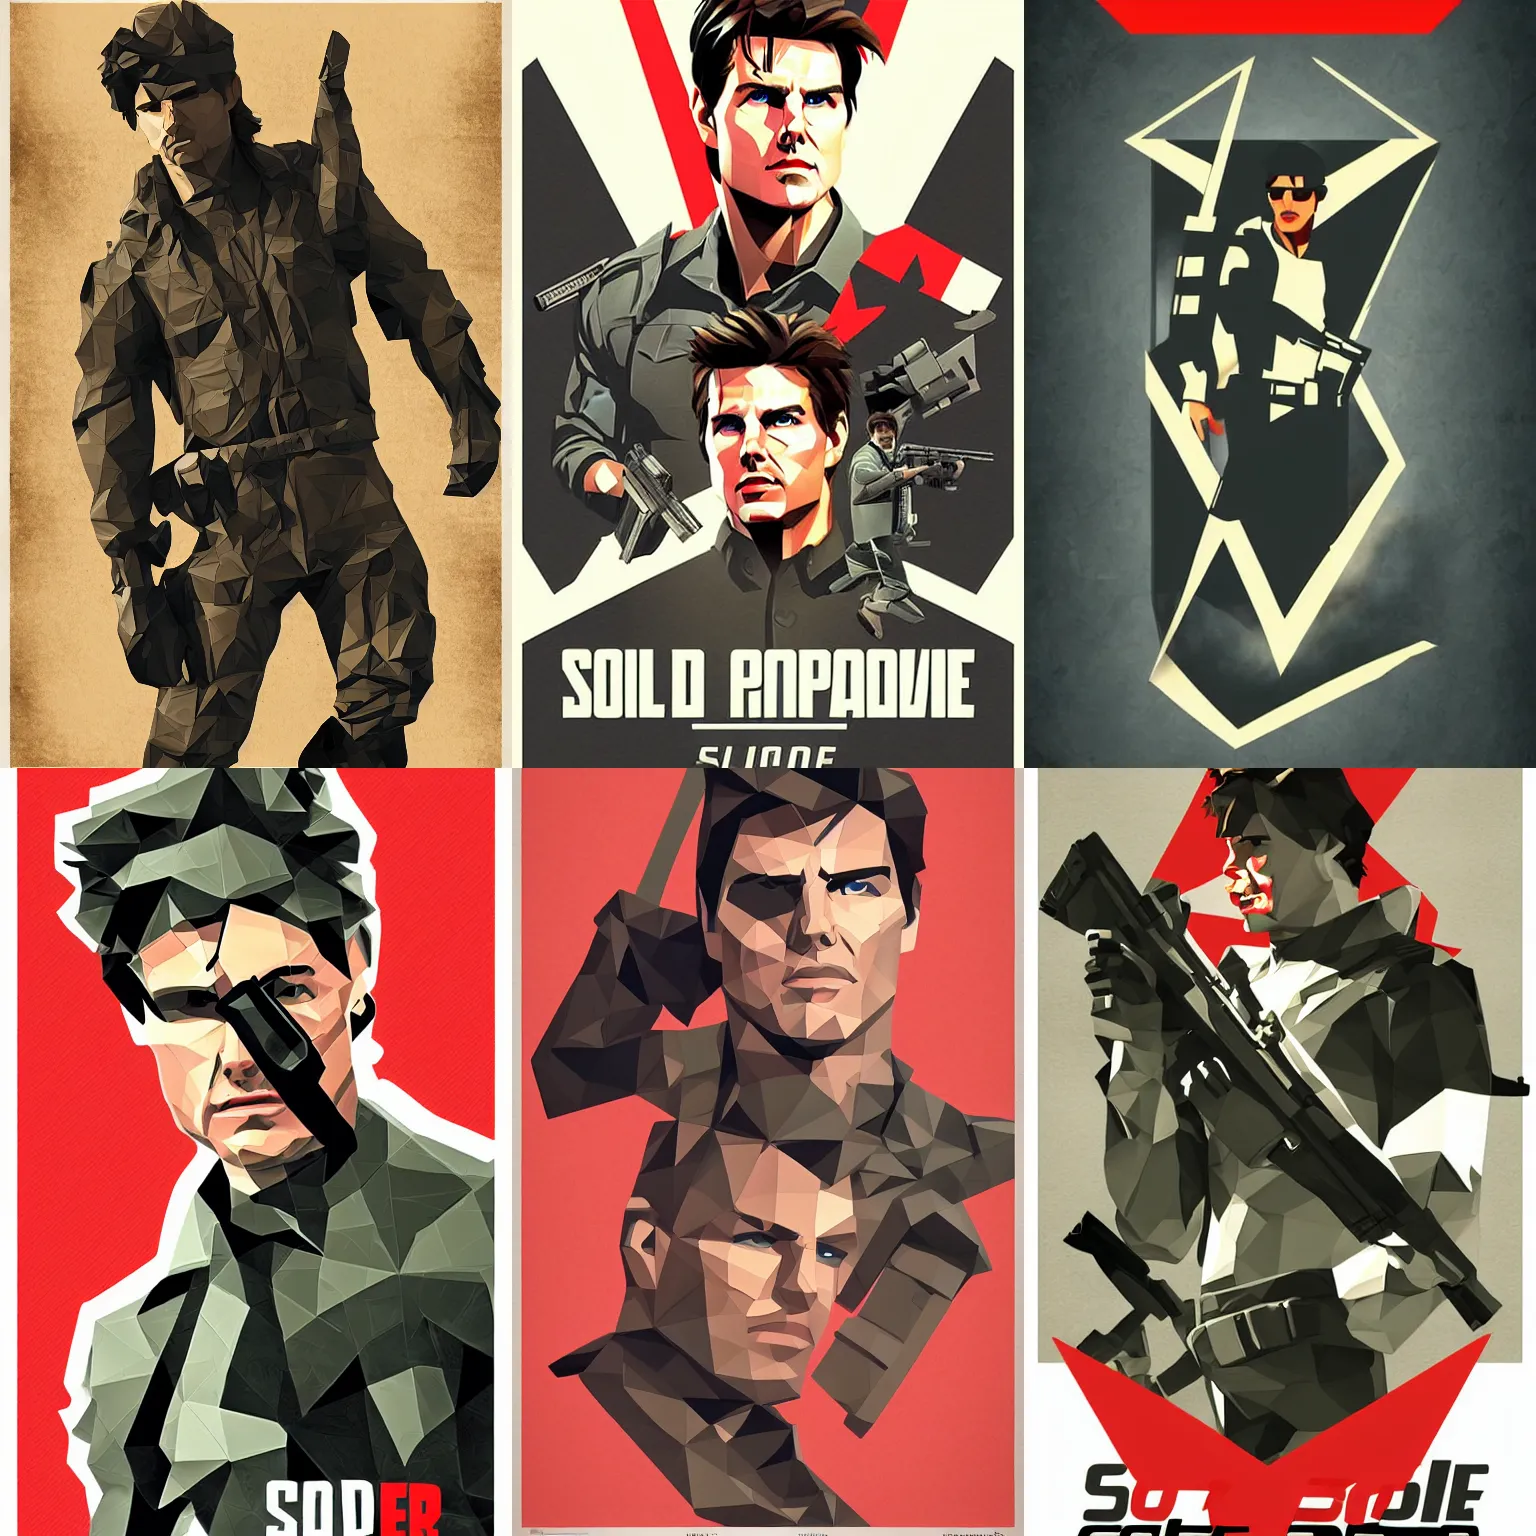 Prompt: Tom Cruise as Solid Snake, low poly, Soviet era propaganda poster